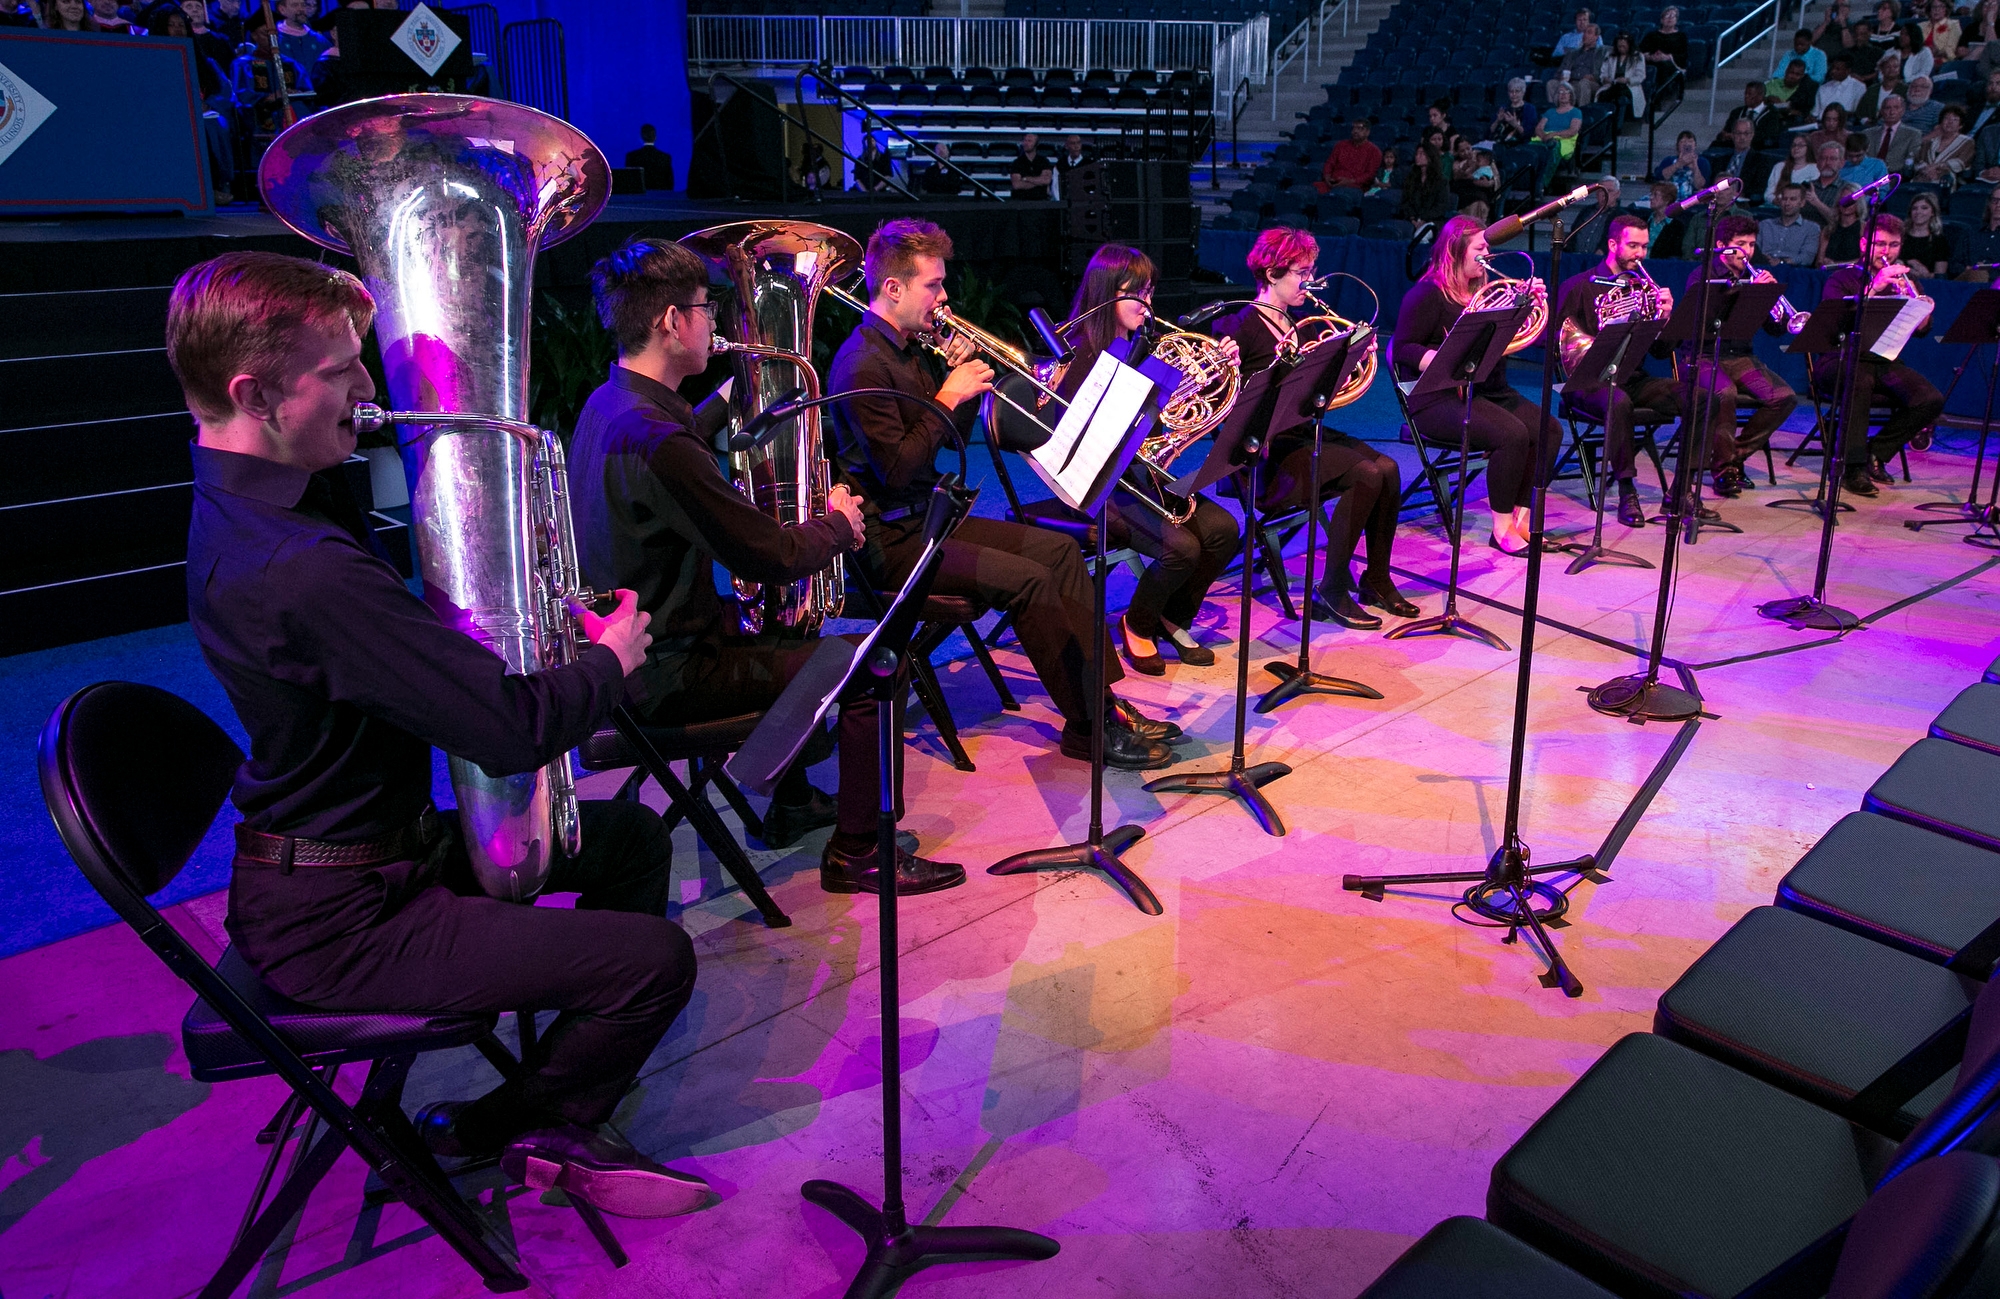 Student musicians perform during the DePaul University commencement ceremony for the School of Music and The Theatre School. (DePaul University/Jamie Moncrief)